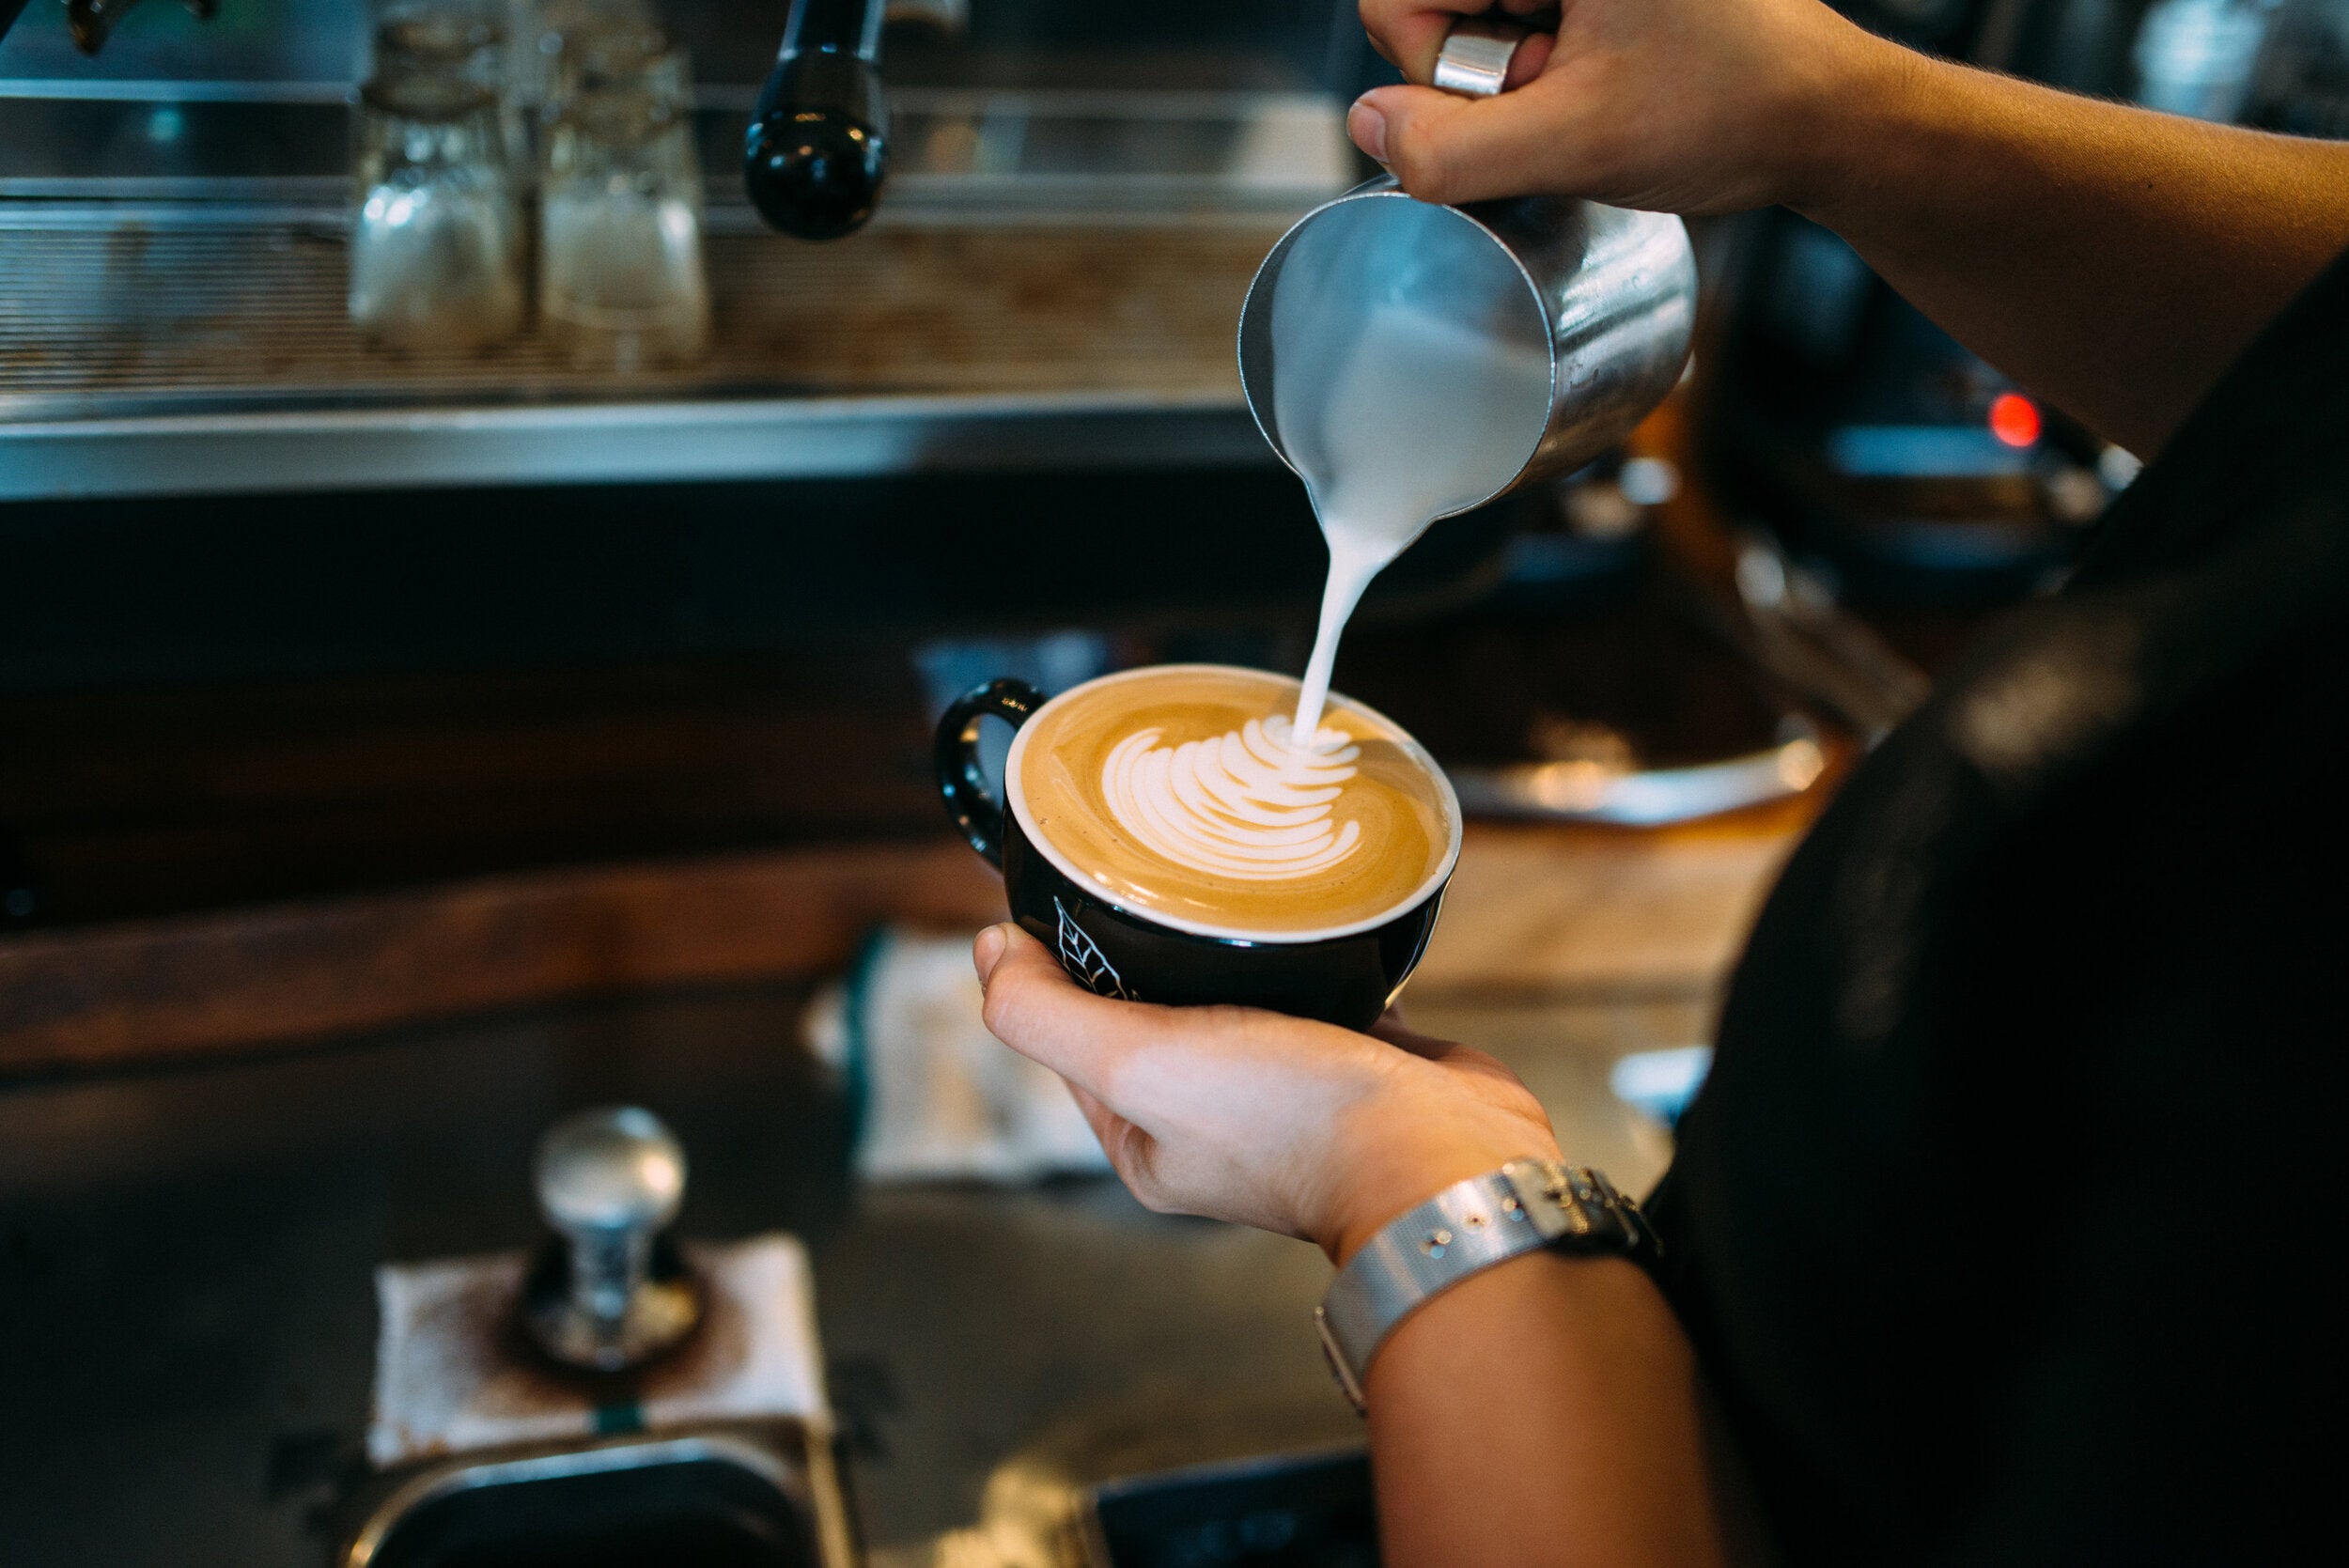 Along with being a great café manager, Margaret also makes a mean 100% Kona latté. PHOTO: Blake Wisz